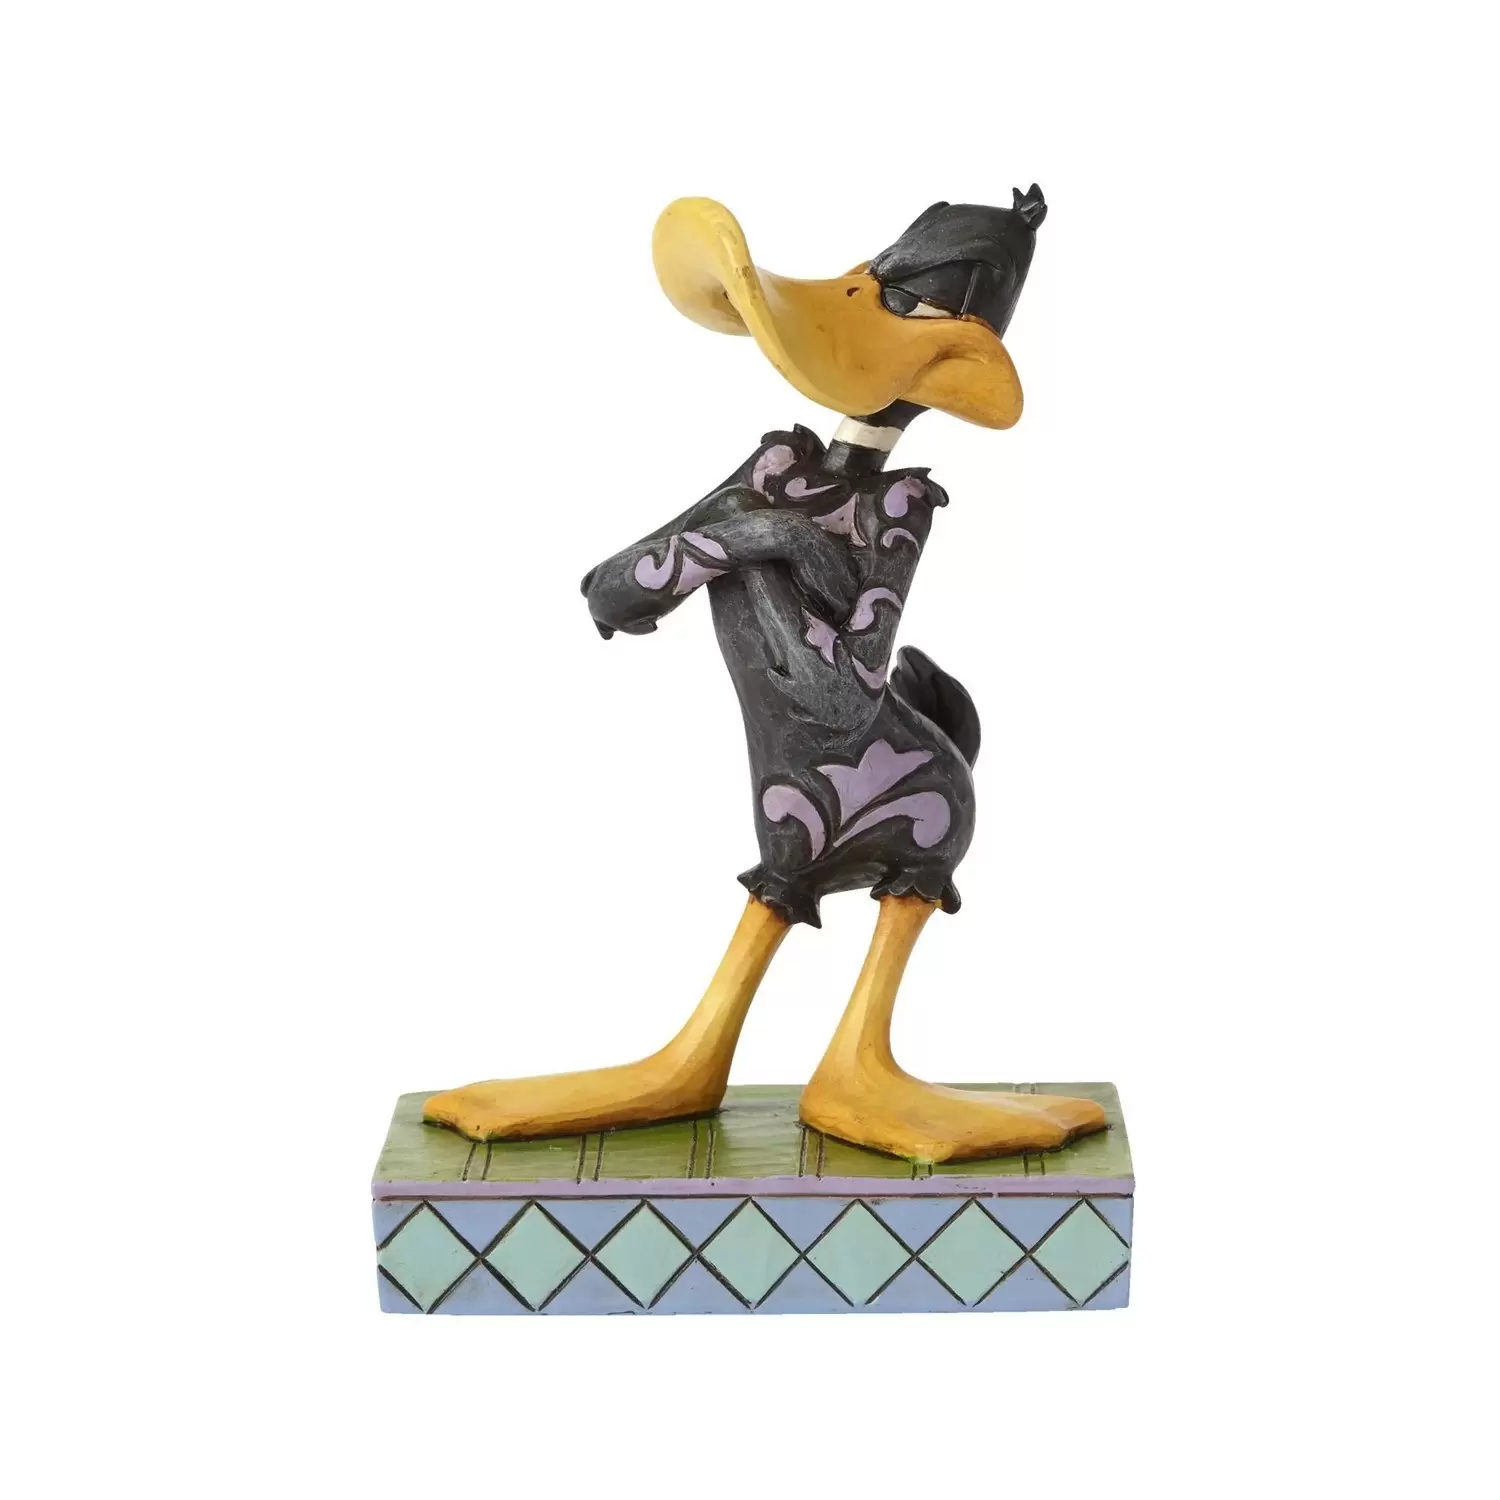 Looney Tunes characters by Jim Shore - Disdainful Duck - Daffy Duck Personality Pose